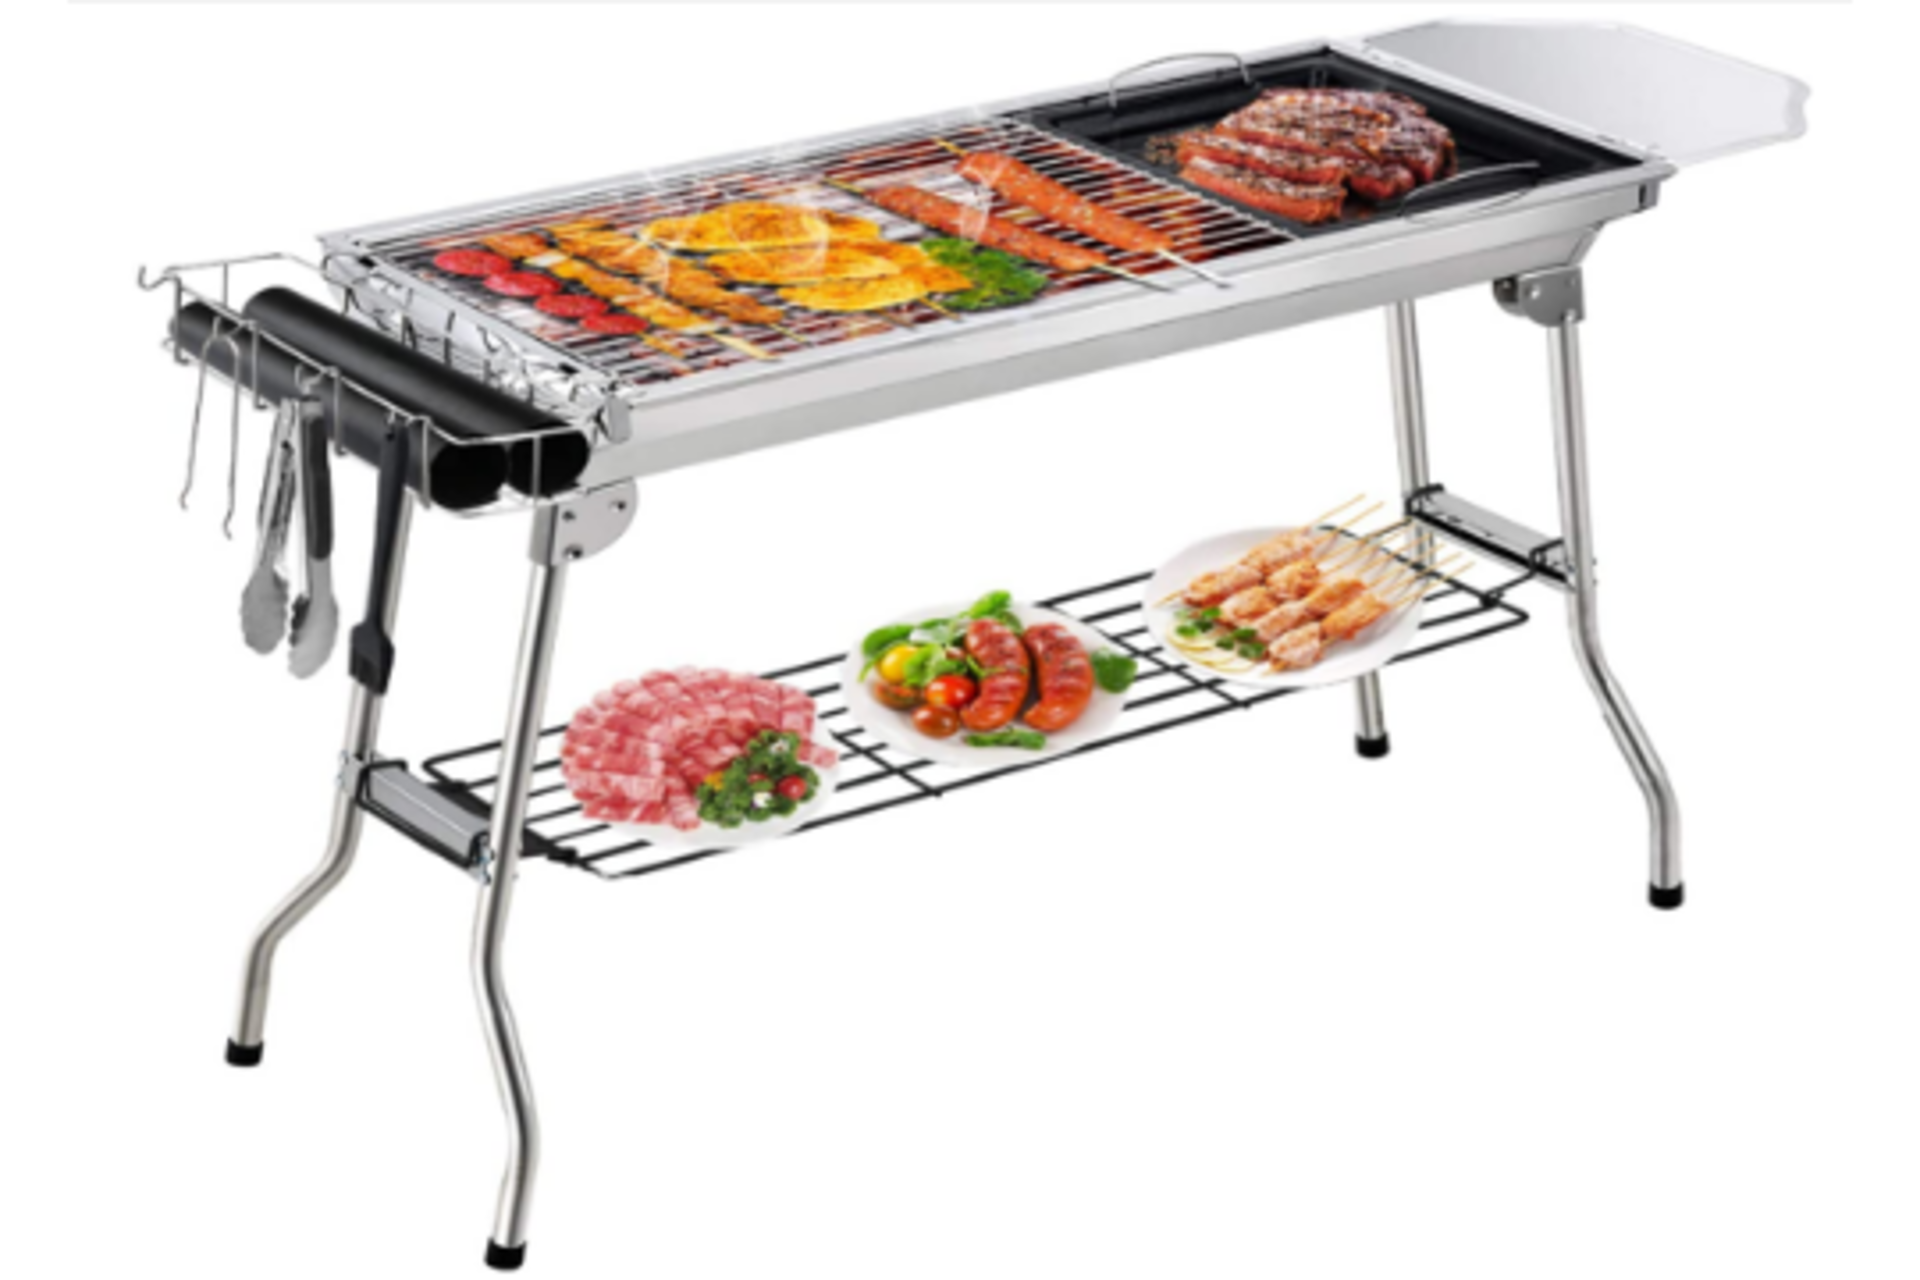 BRAND NEW LARGE BBQ GRILL WITH UNDER STORAGE SHELF RRP £220